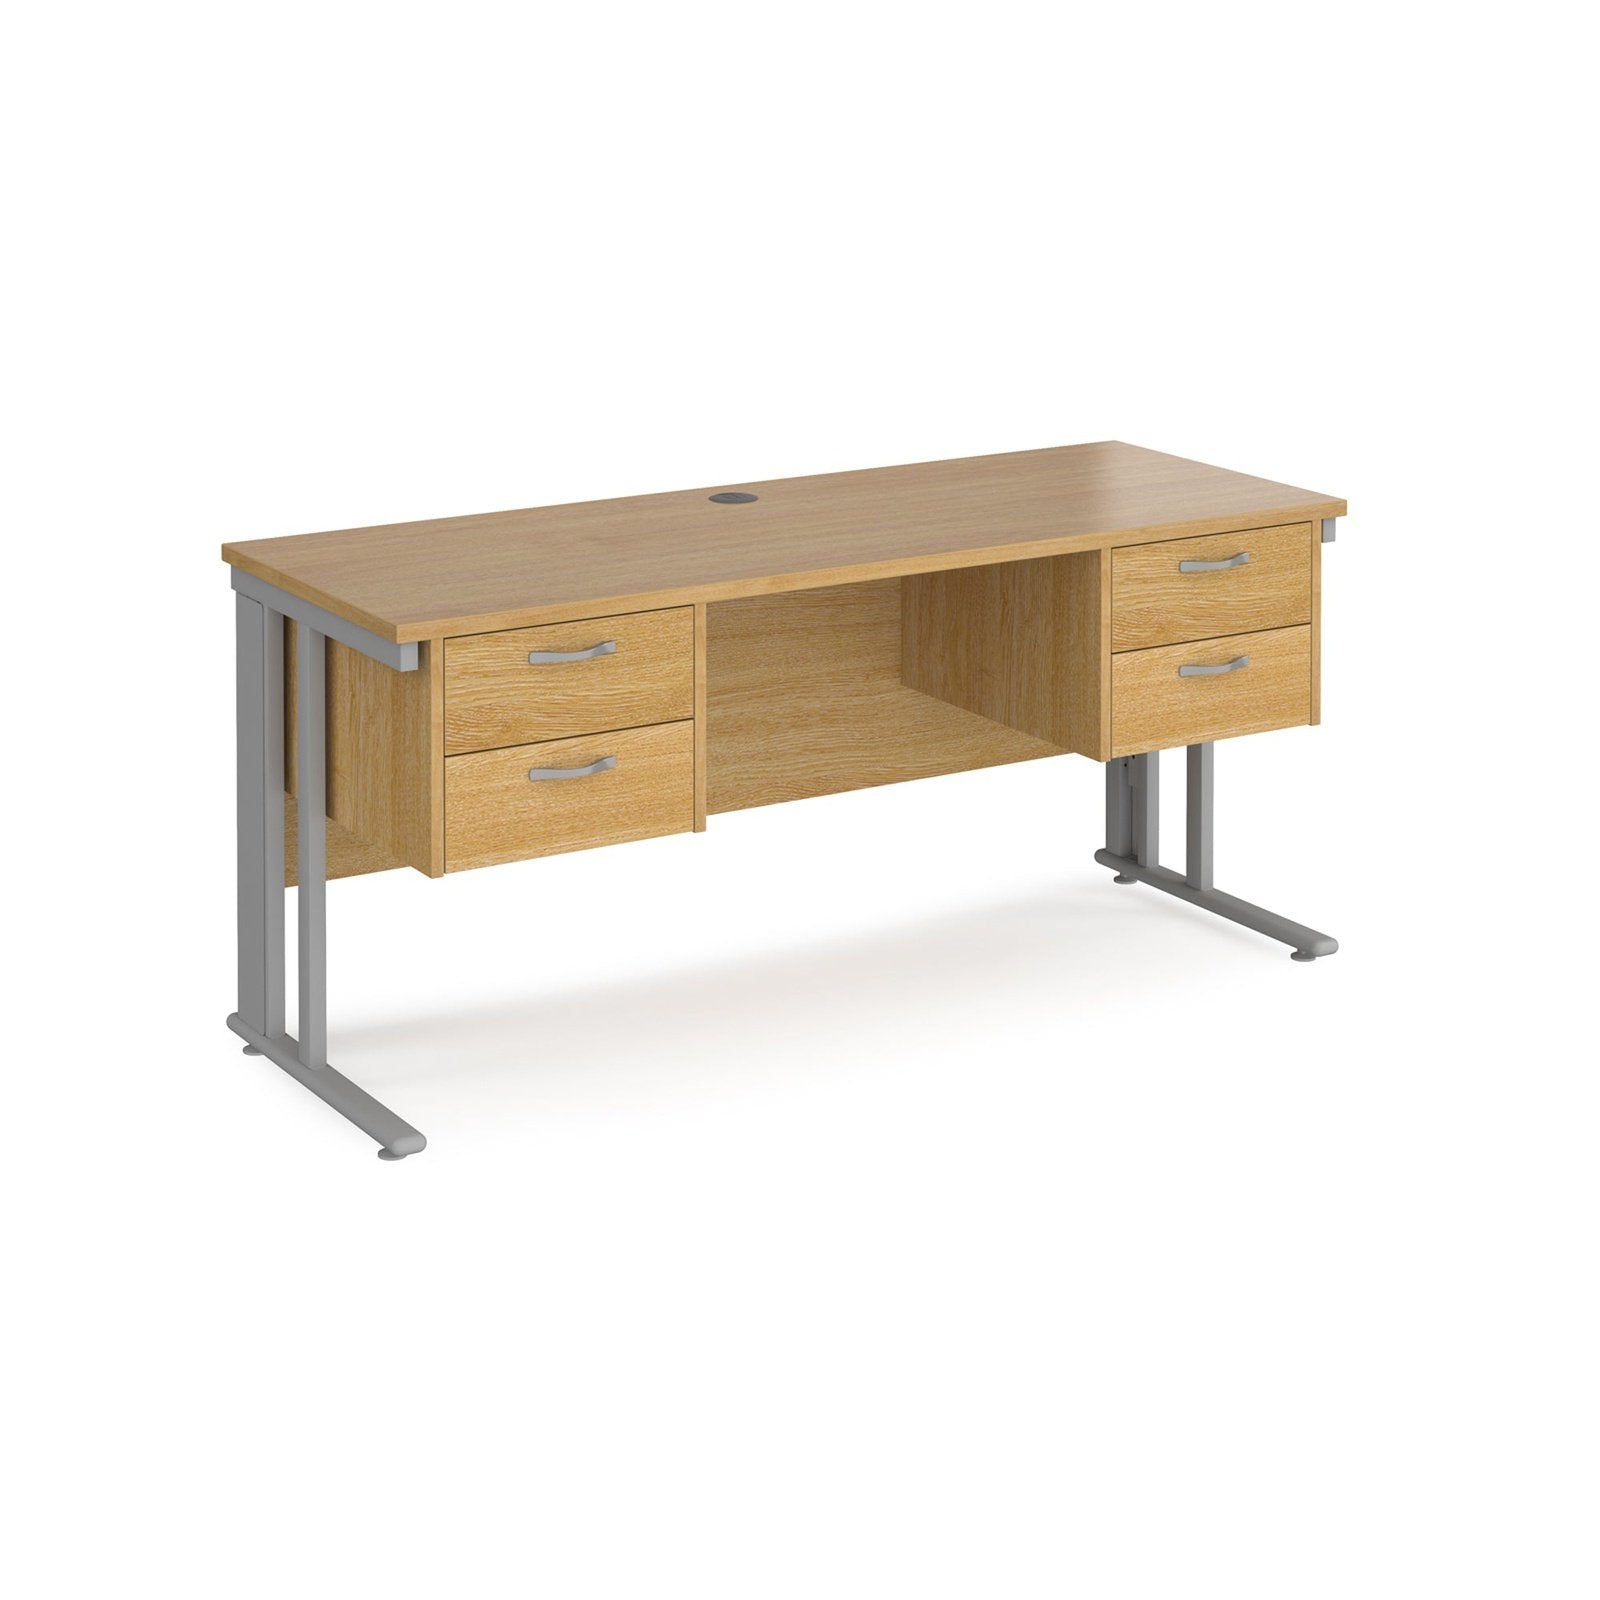 Maestro 25 cable managed leg straight desk 600 deep with two x 2 drawer pedestals - Office Products Online